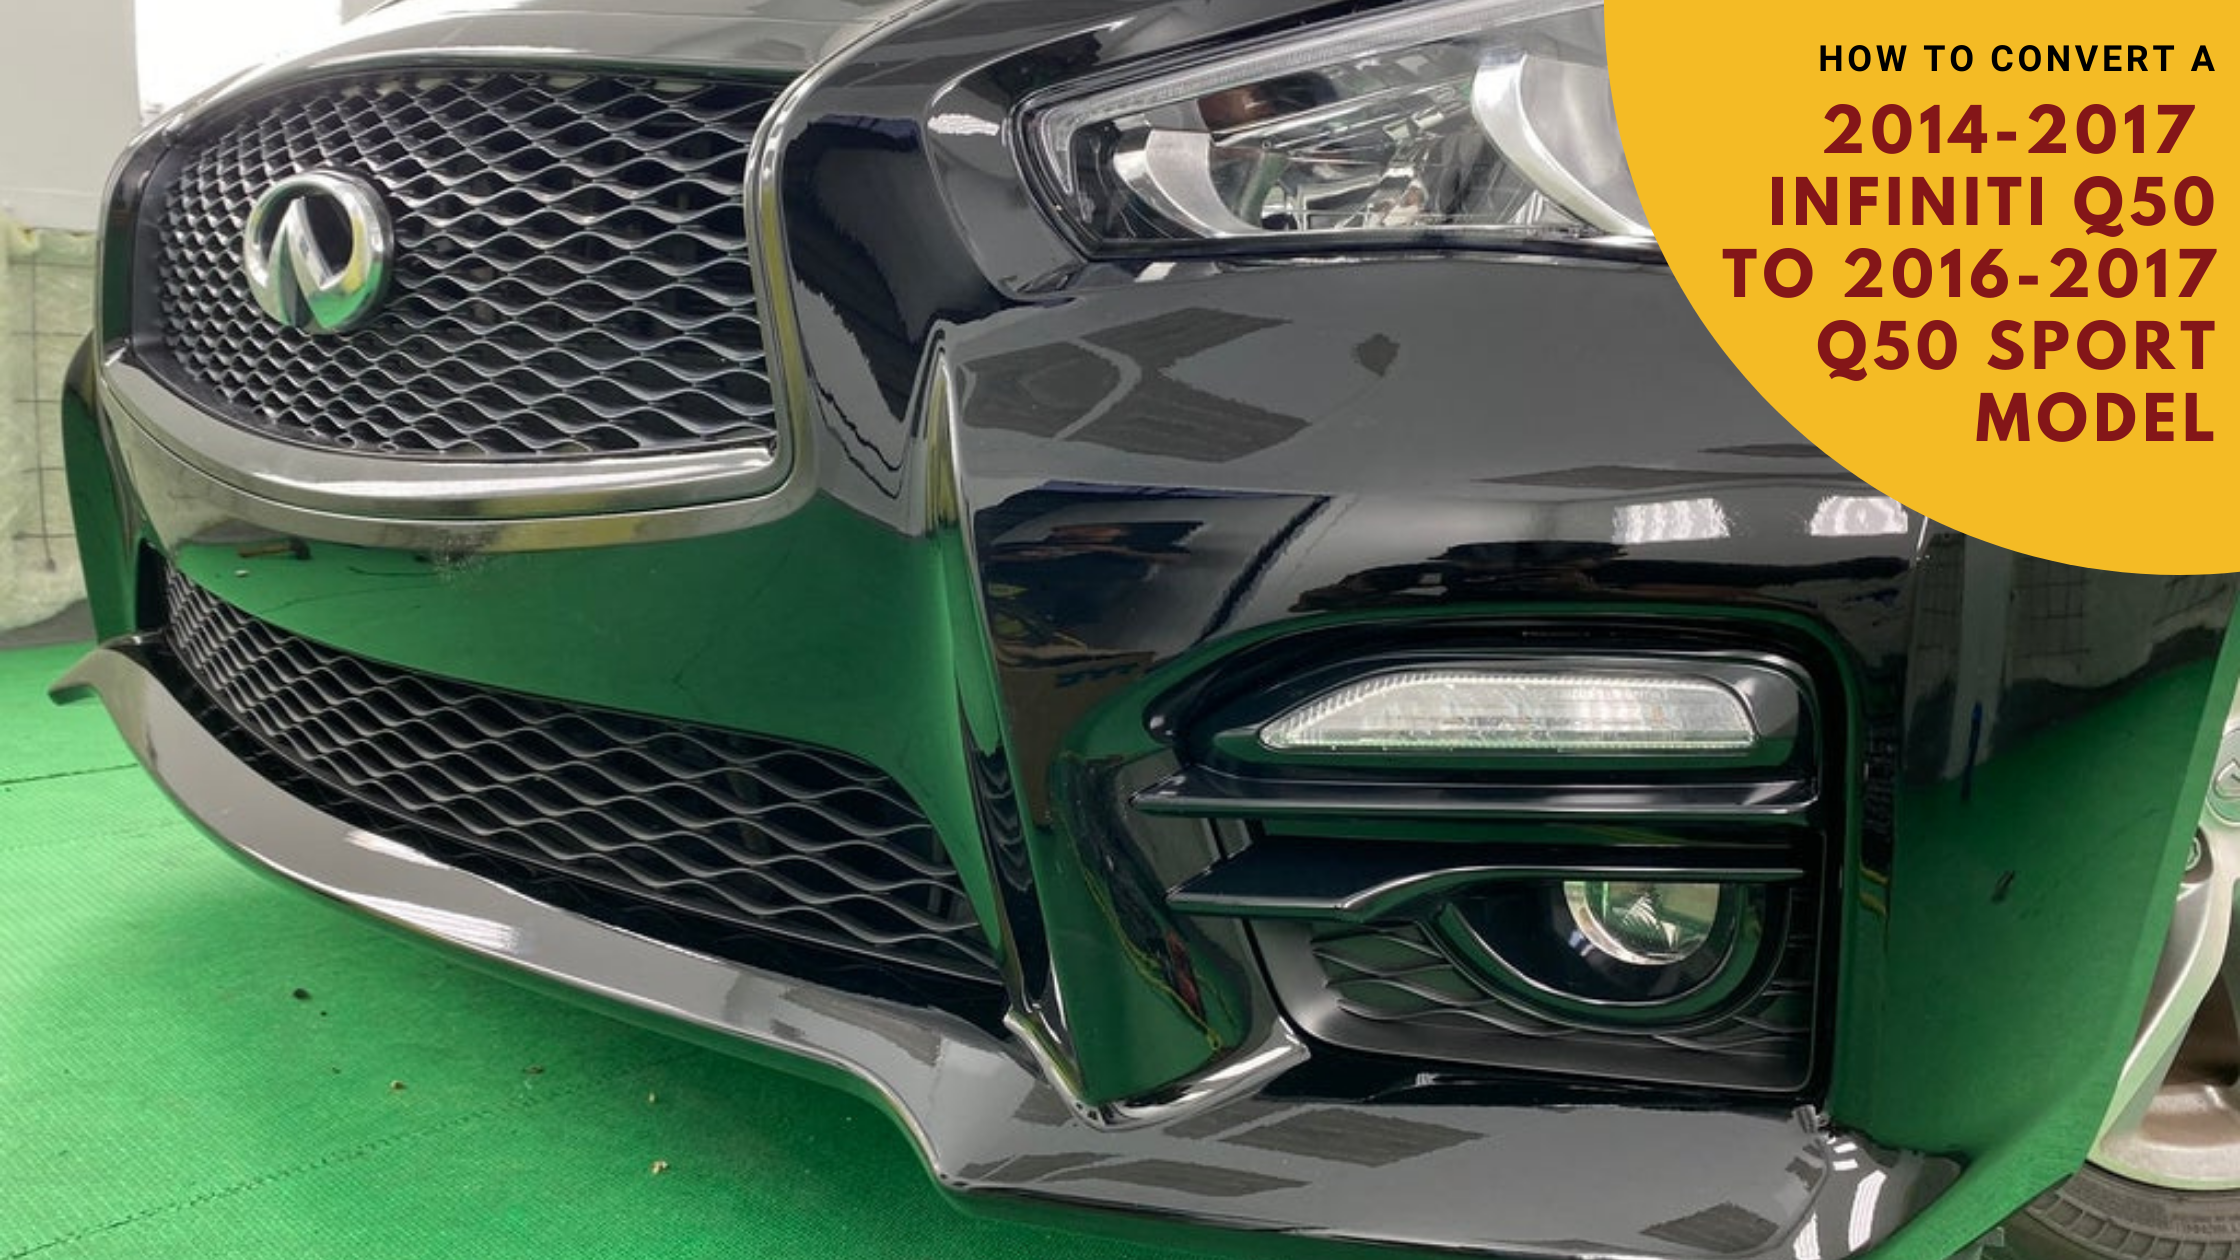 How to Convert Your 2014-2017 Infiniti Q50 Front Bumper to look like the Sport Model